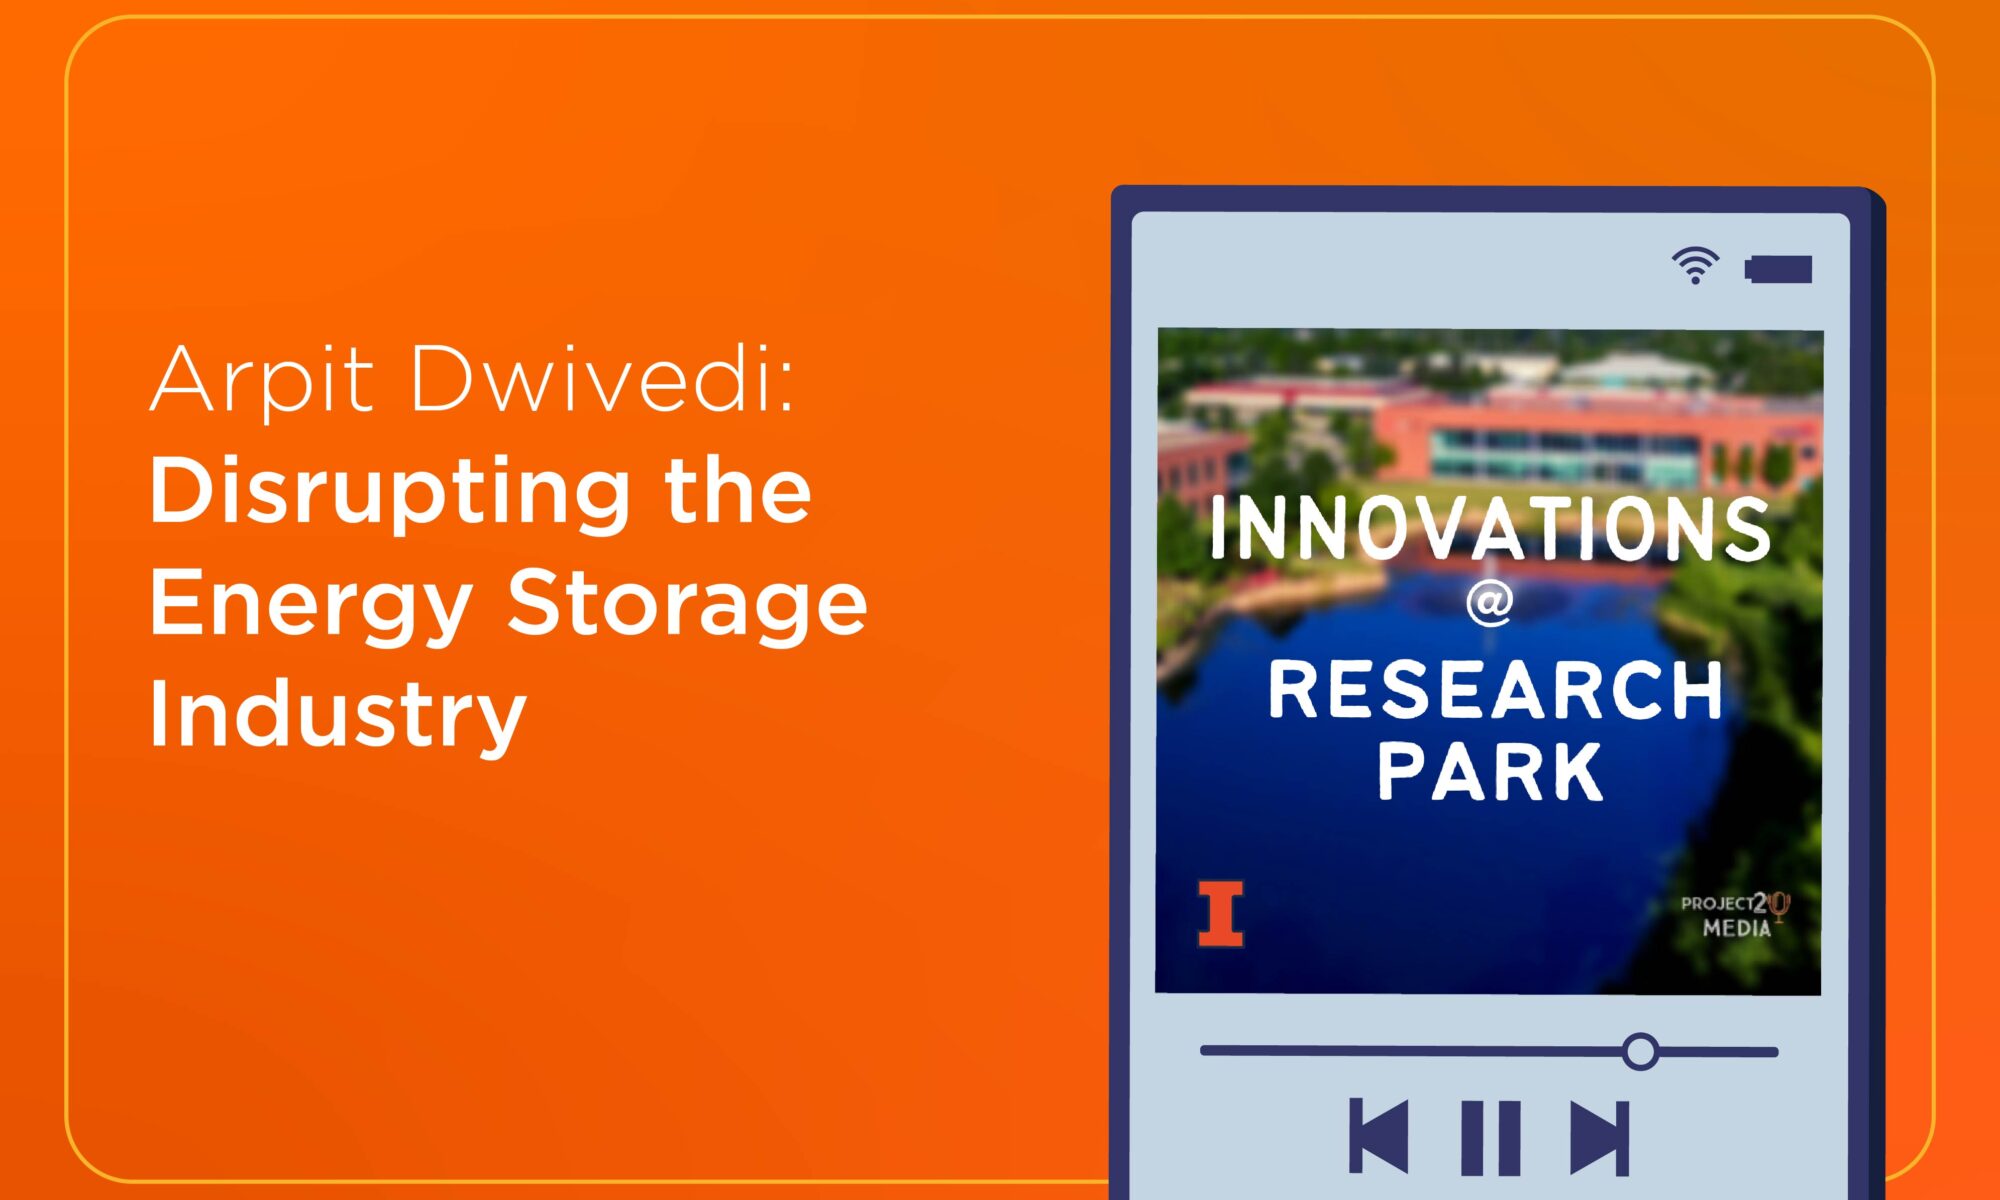 New Podcast Episode: Arpit Dwivedi of Cache Energy Disrupts the Energy Storage Industry 1 New Podcast Episode: Arpit Dwivedi of Cache Energy Disrupts the Energy Storage Industry